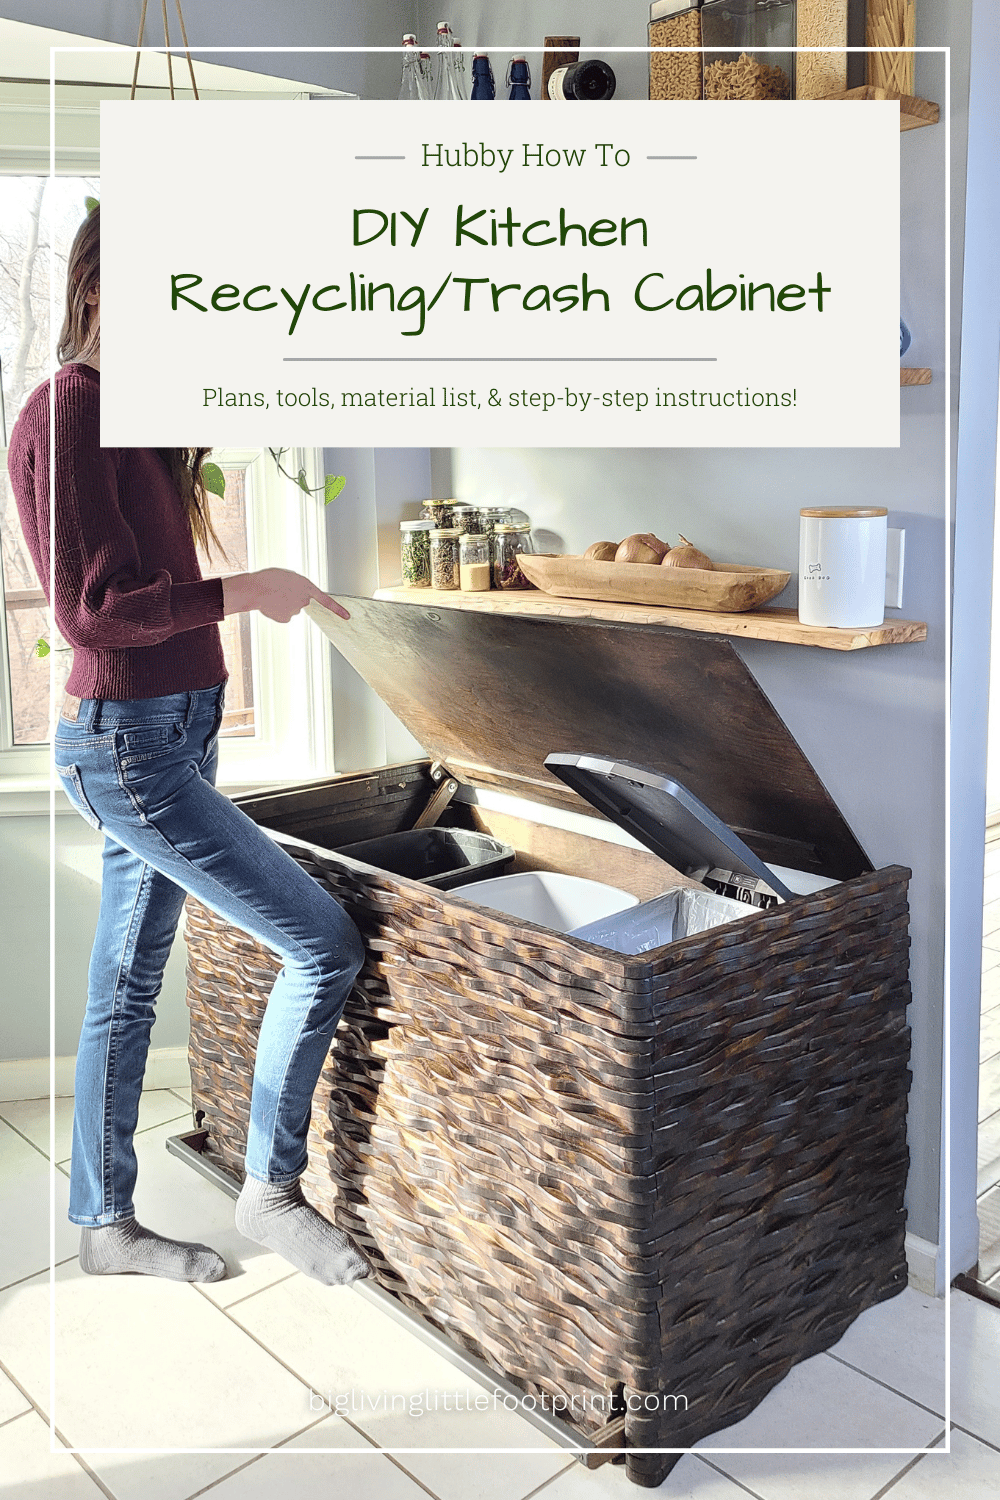 Hubby How To: DIY Kitchen Recycling/Trash Cabinet